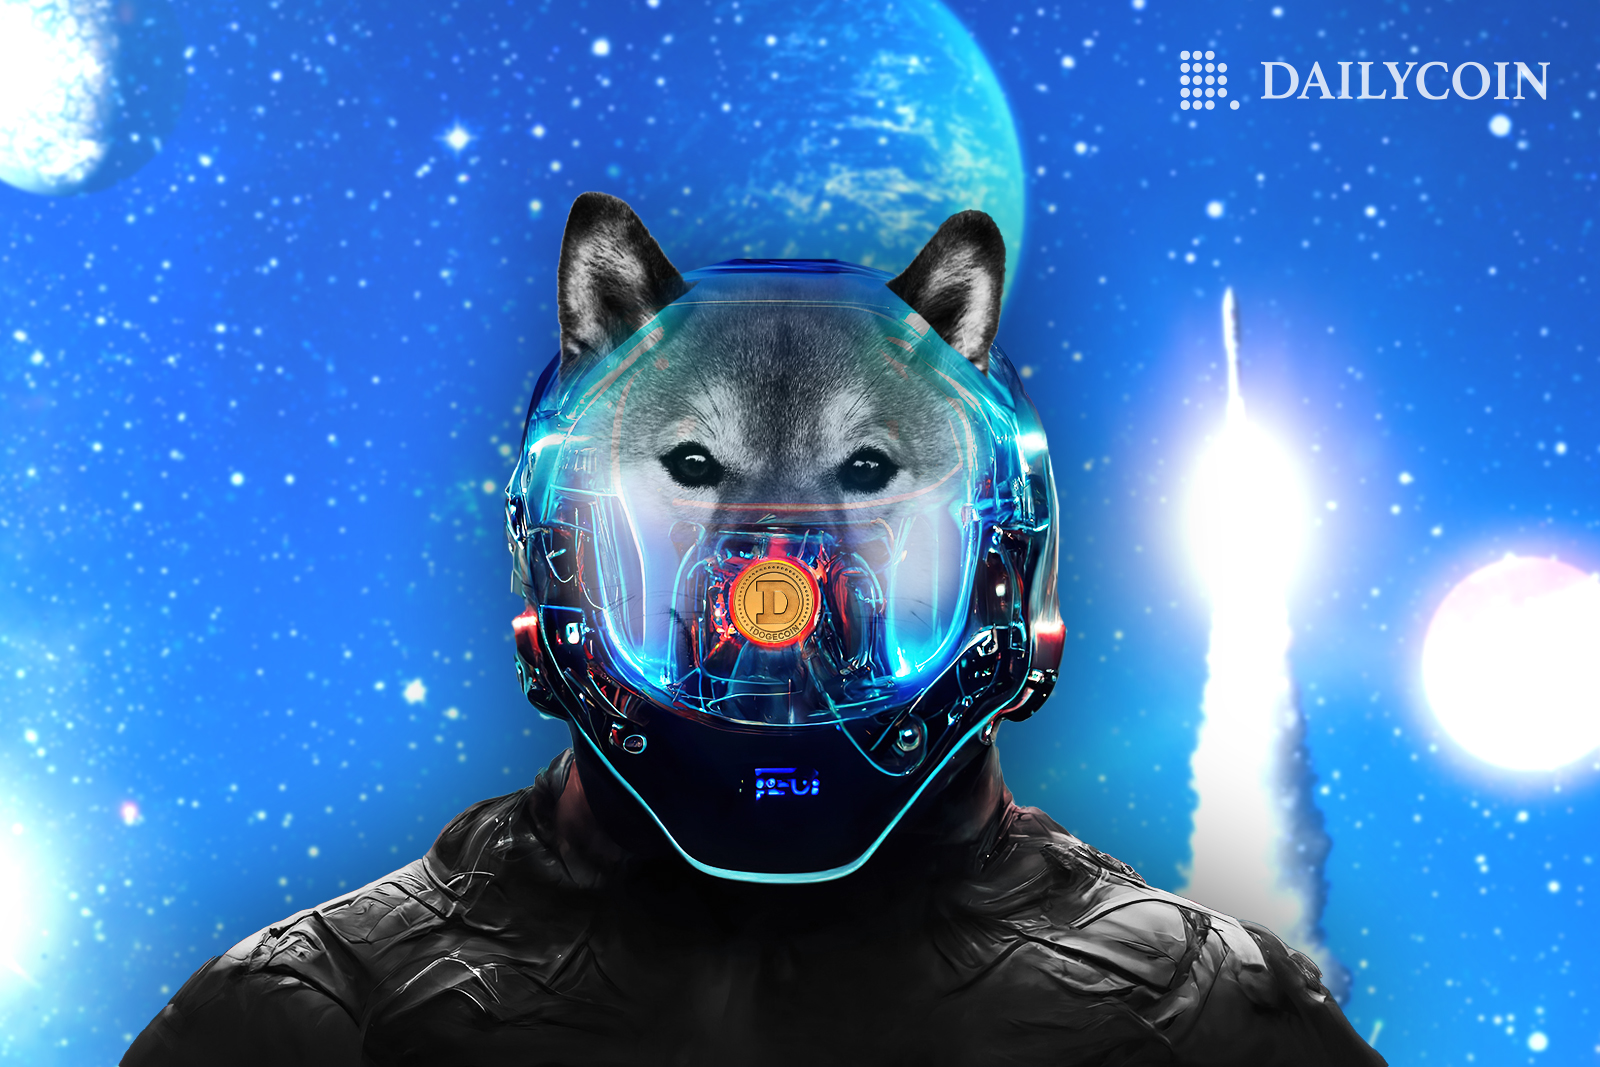 Doge wearing a futuristic mask going into space.